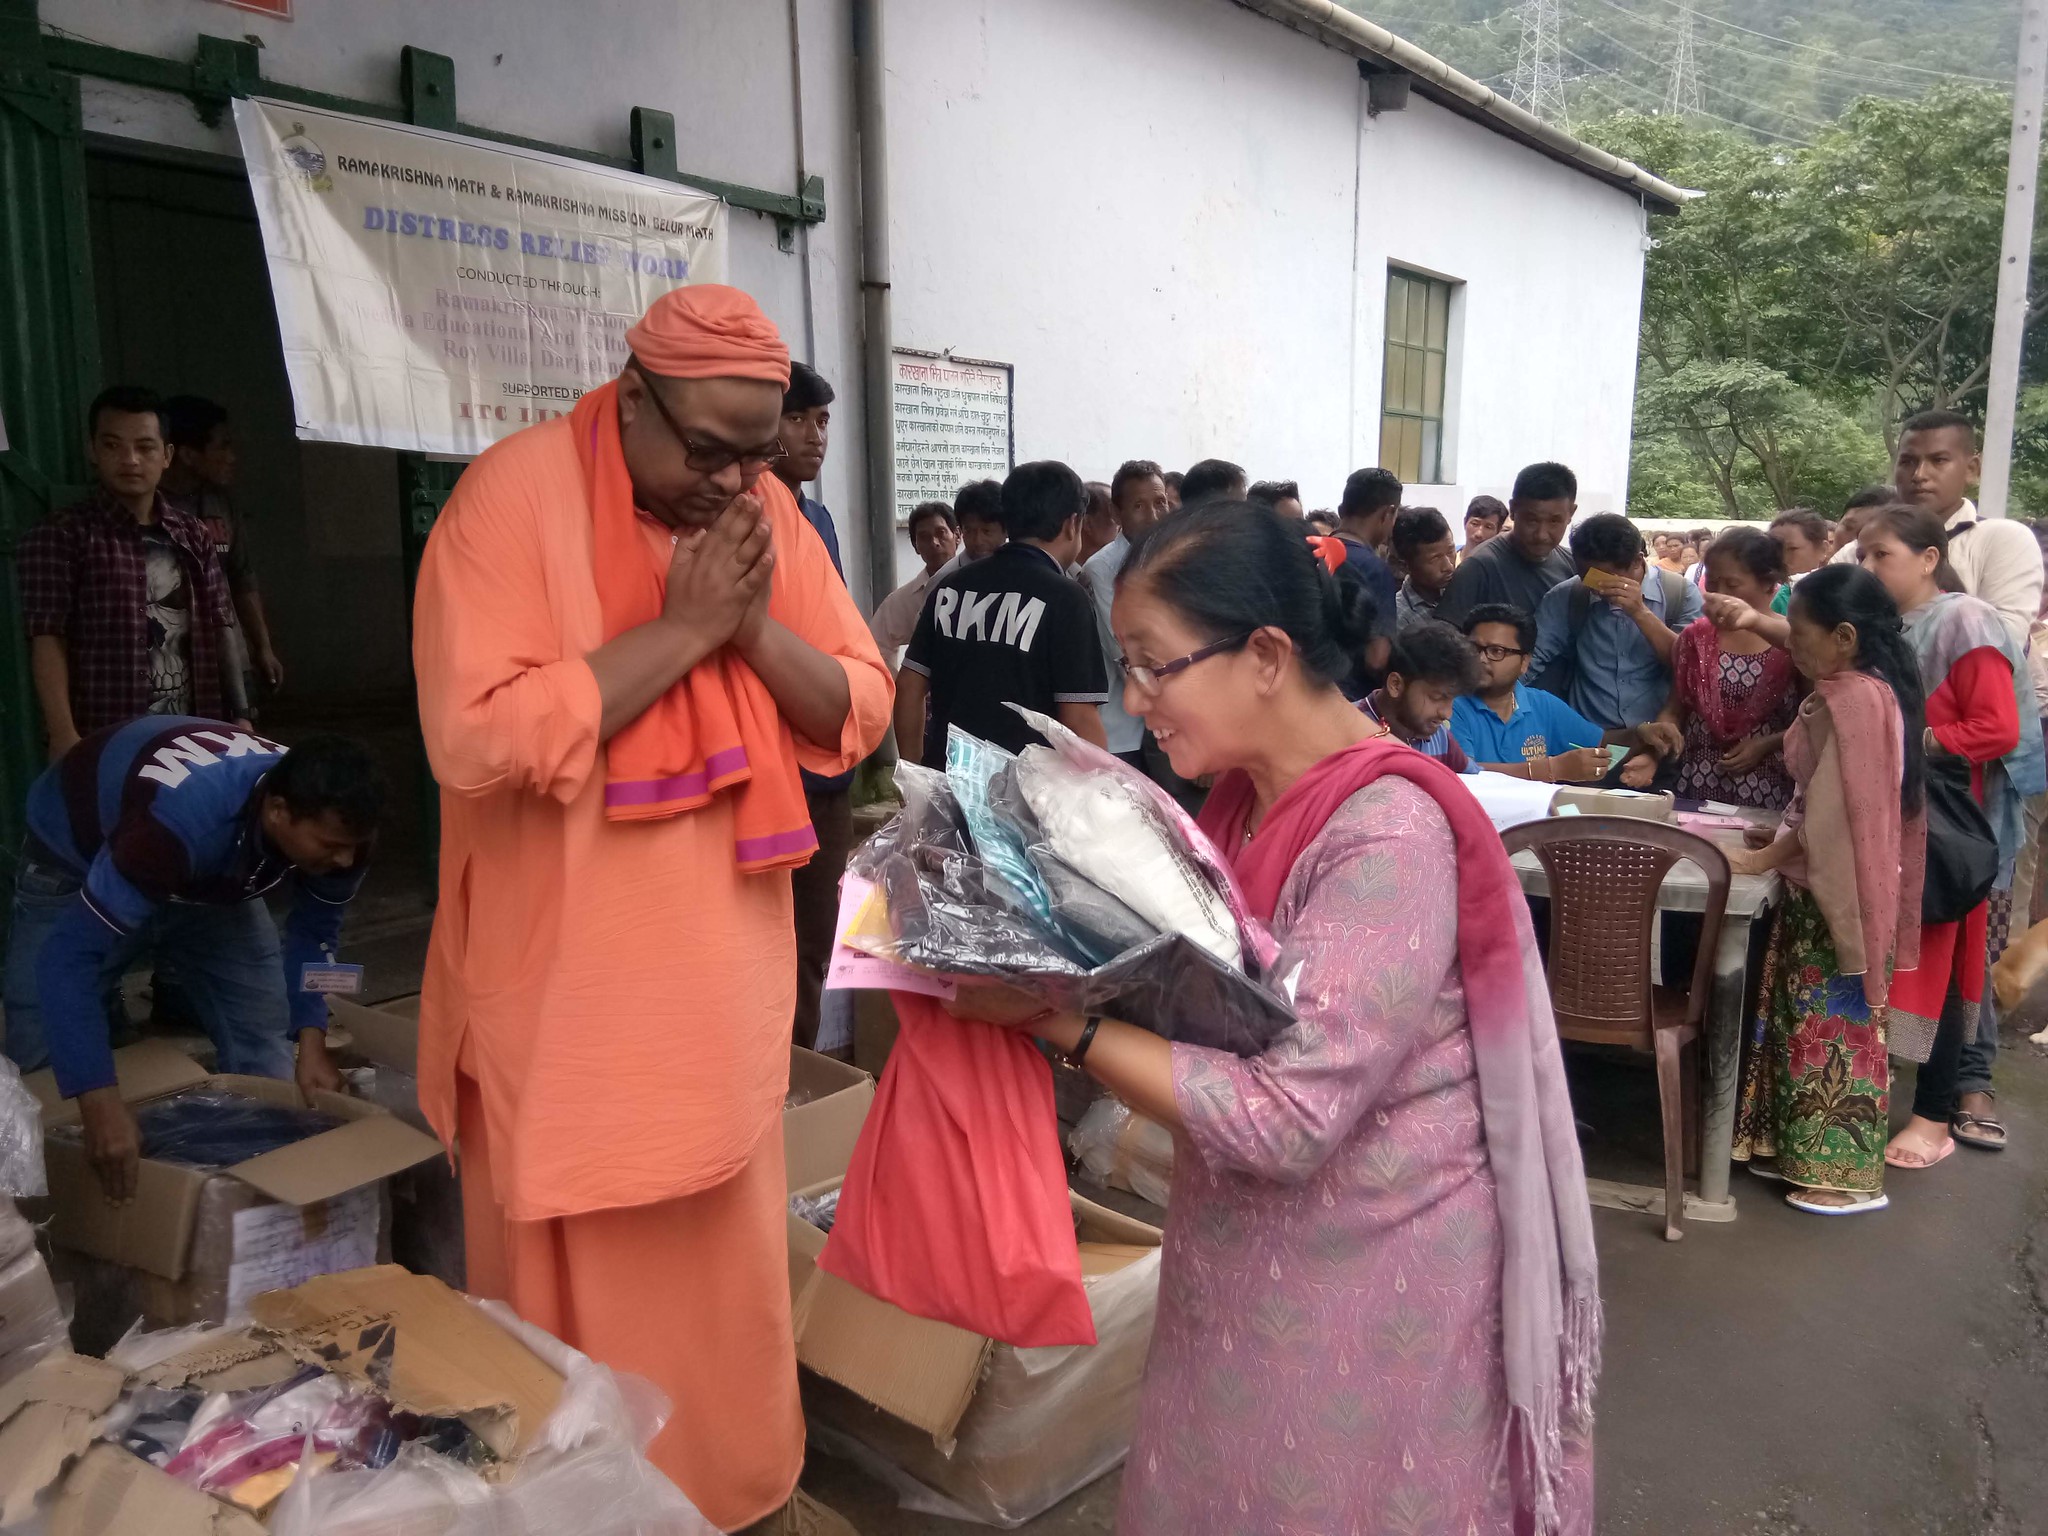 Blessed is the giver, Darjeeling centre